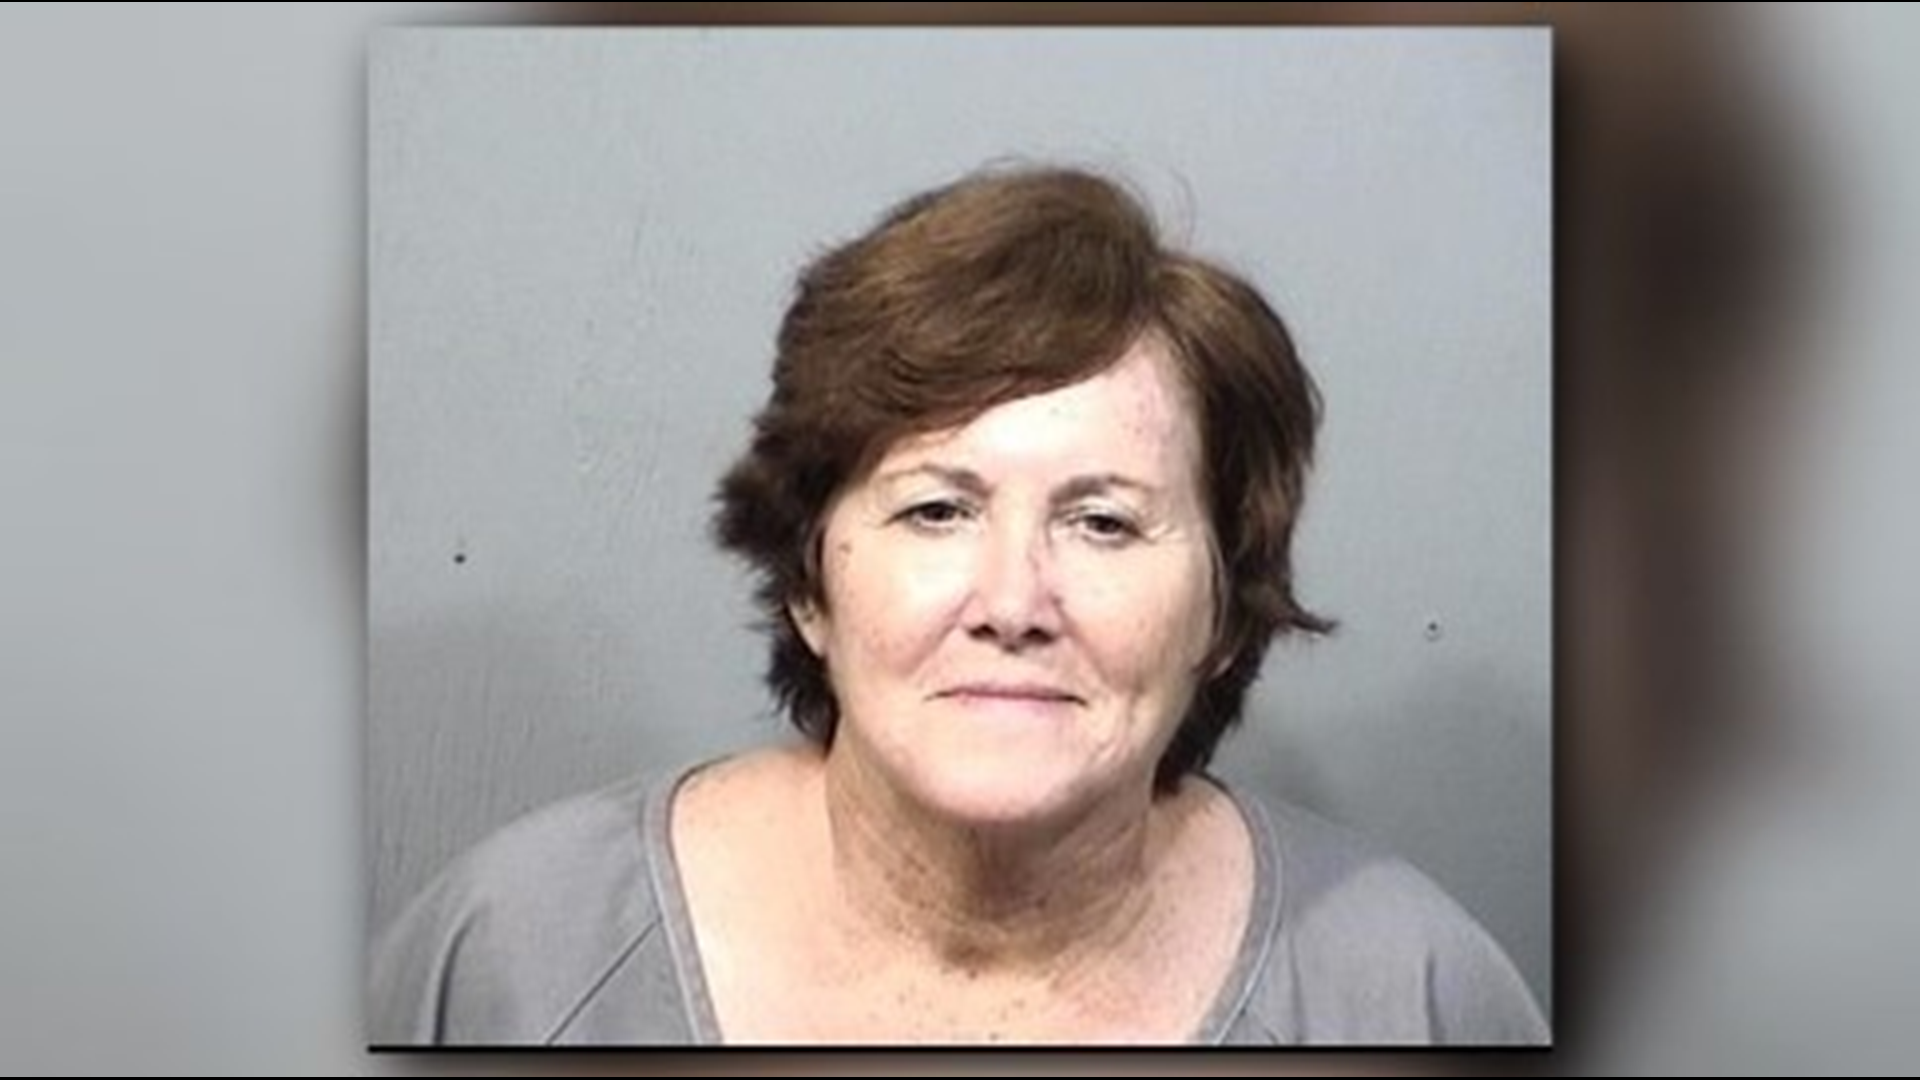 Jo Ann Wilbert, 64, is charged with capital murder for remuneration and solicitation for capital murder for her involvement in the murder of Christine Watkins.